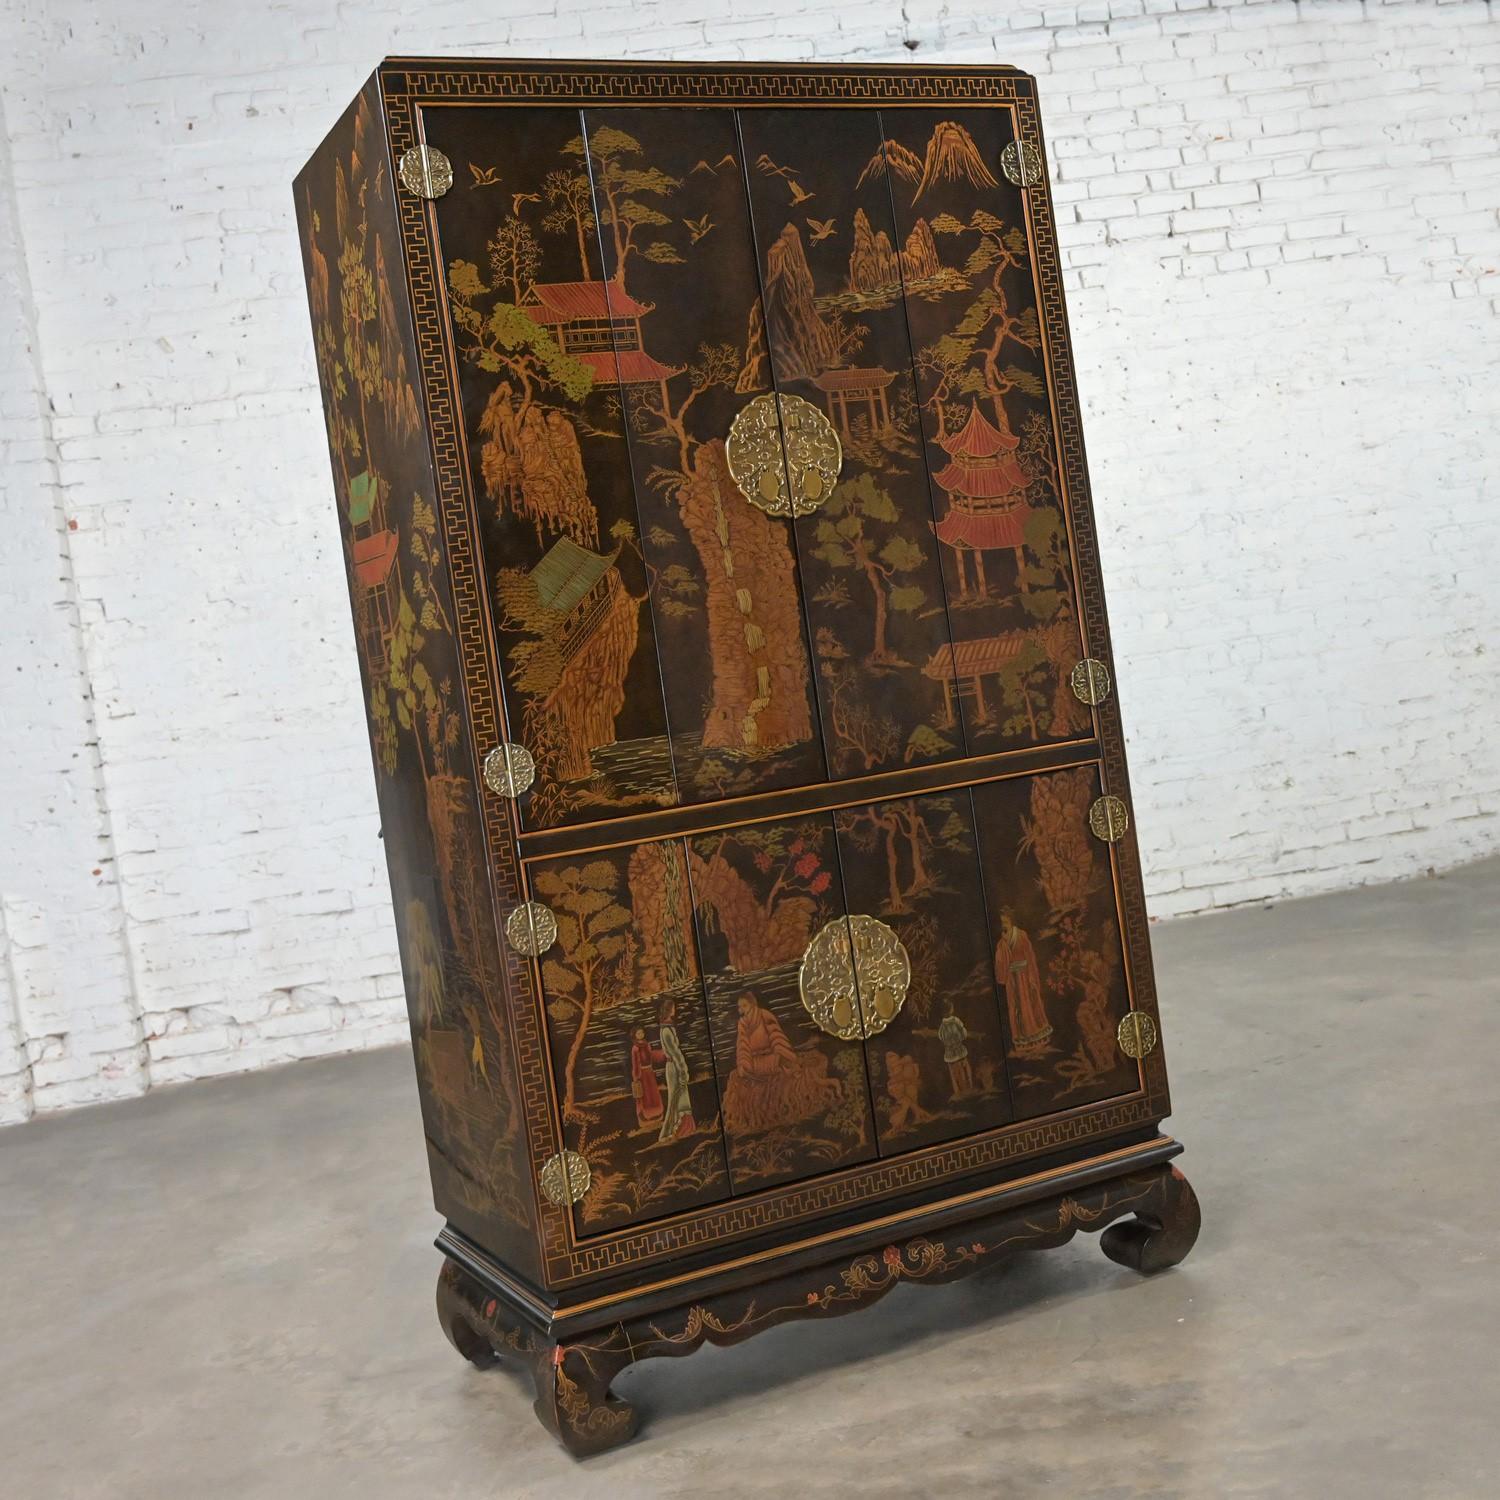 Incredible Late 20th Century Chinoiserie entertainment storage cabinet or armoire with painted scenic designs, Ming style feet, brass hardware, and a lighted center section by Henredon from their Folio 10 Collection. Beautiful condition, keeping in